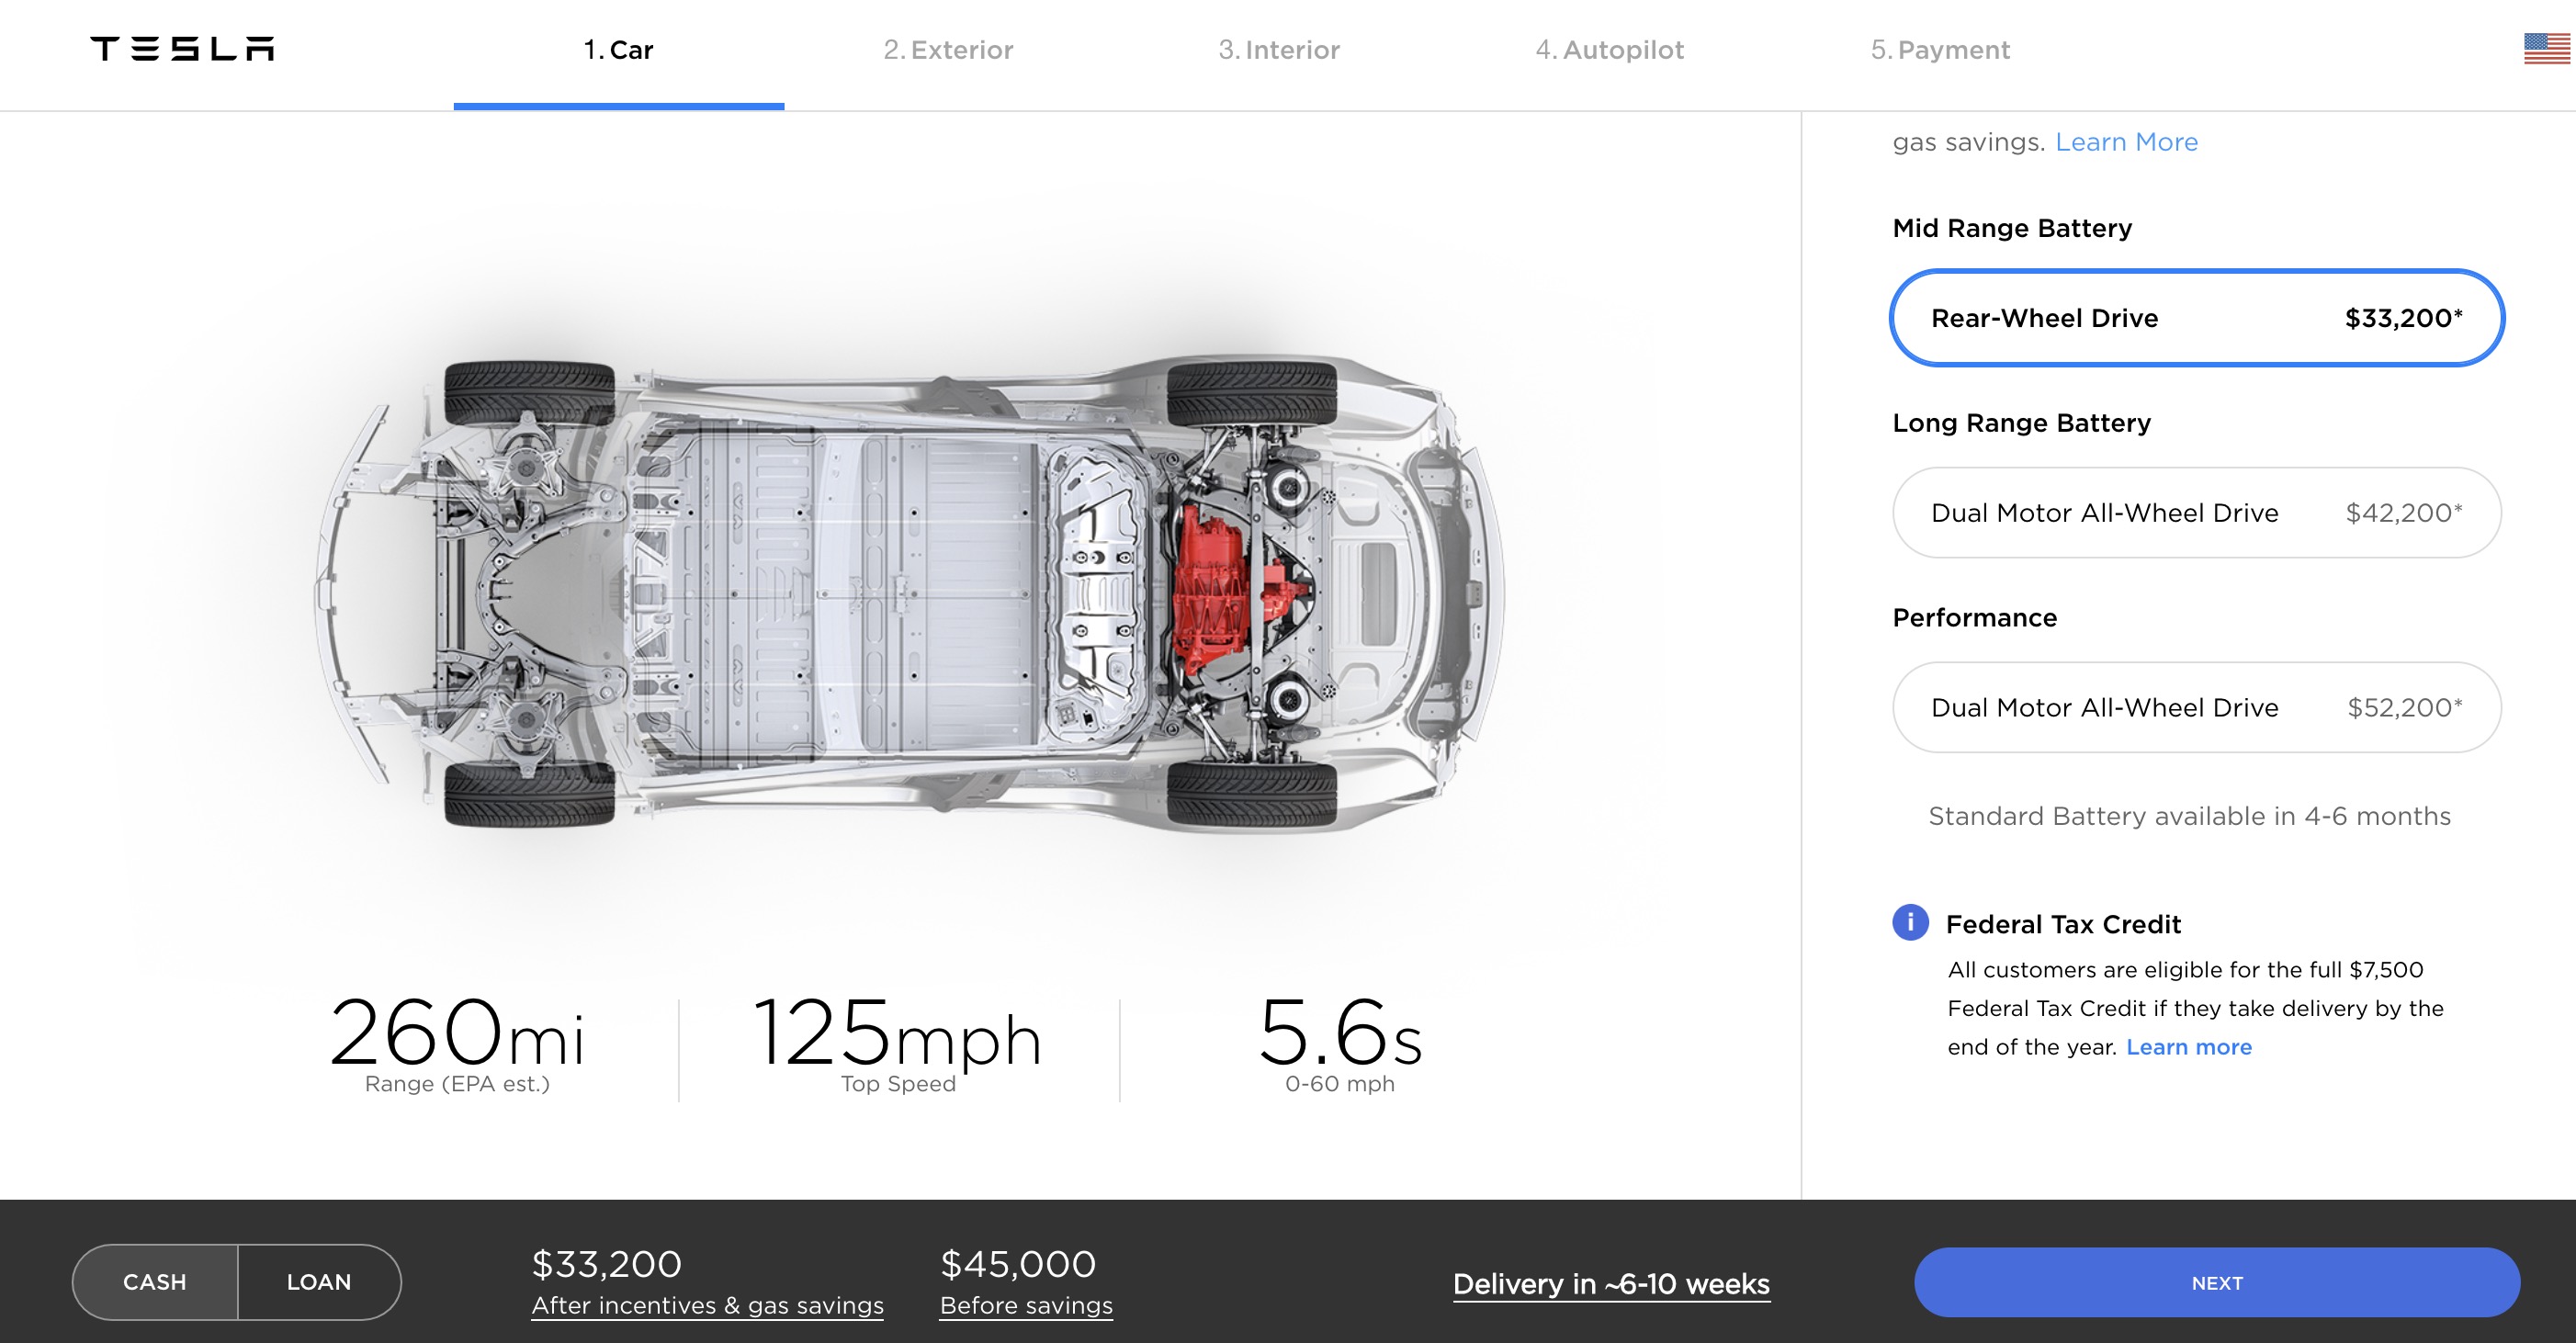 Tesla launches new Model 3 with 'midrange' battery for 45,000, changes pricing structure